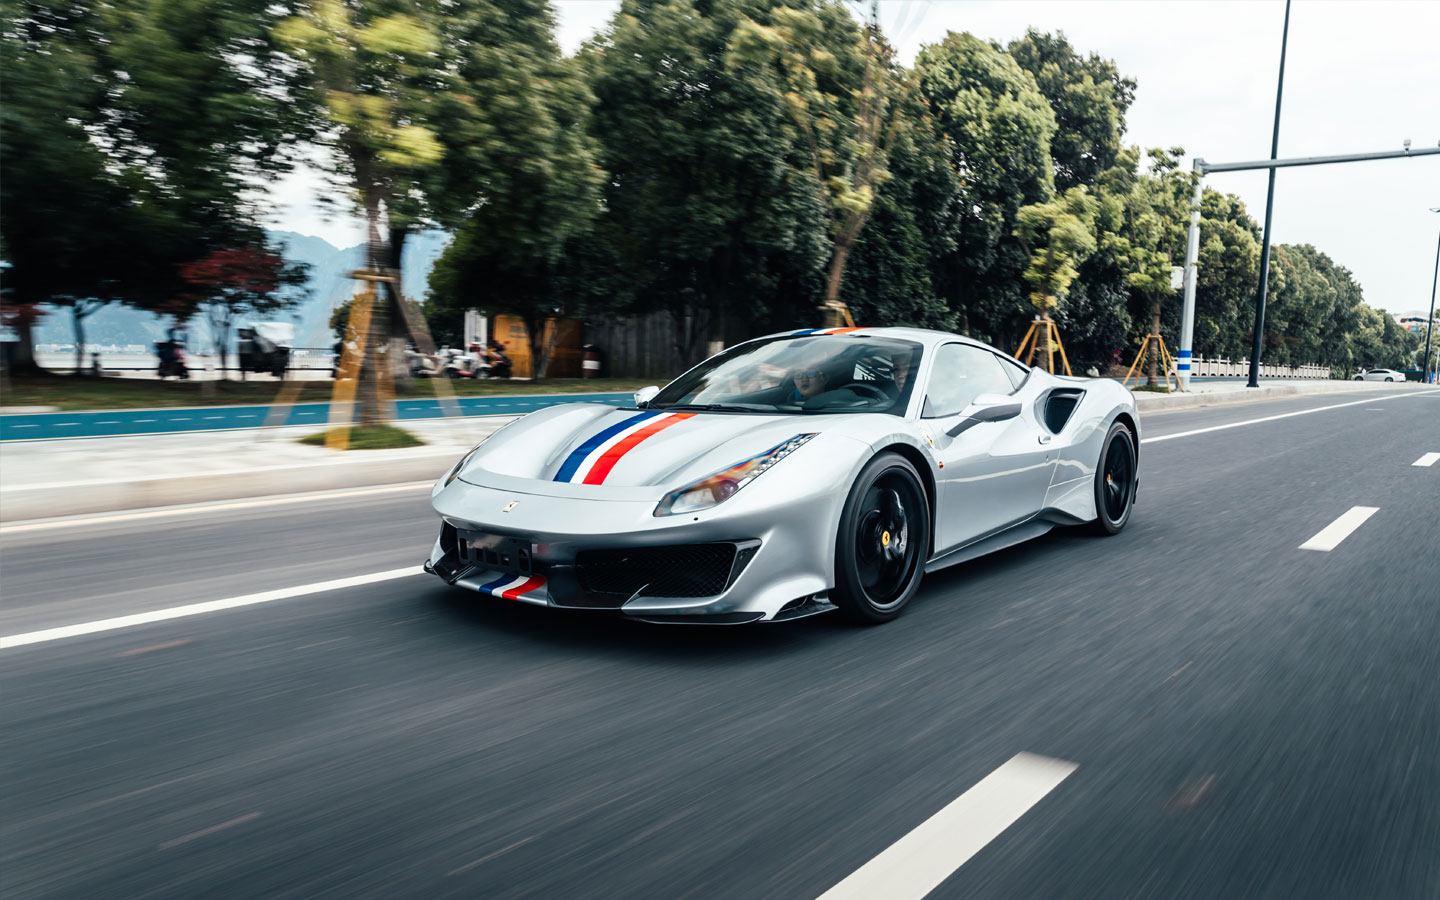 white ferrari hypercar is well known among the hypercars